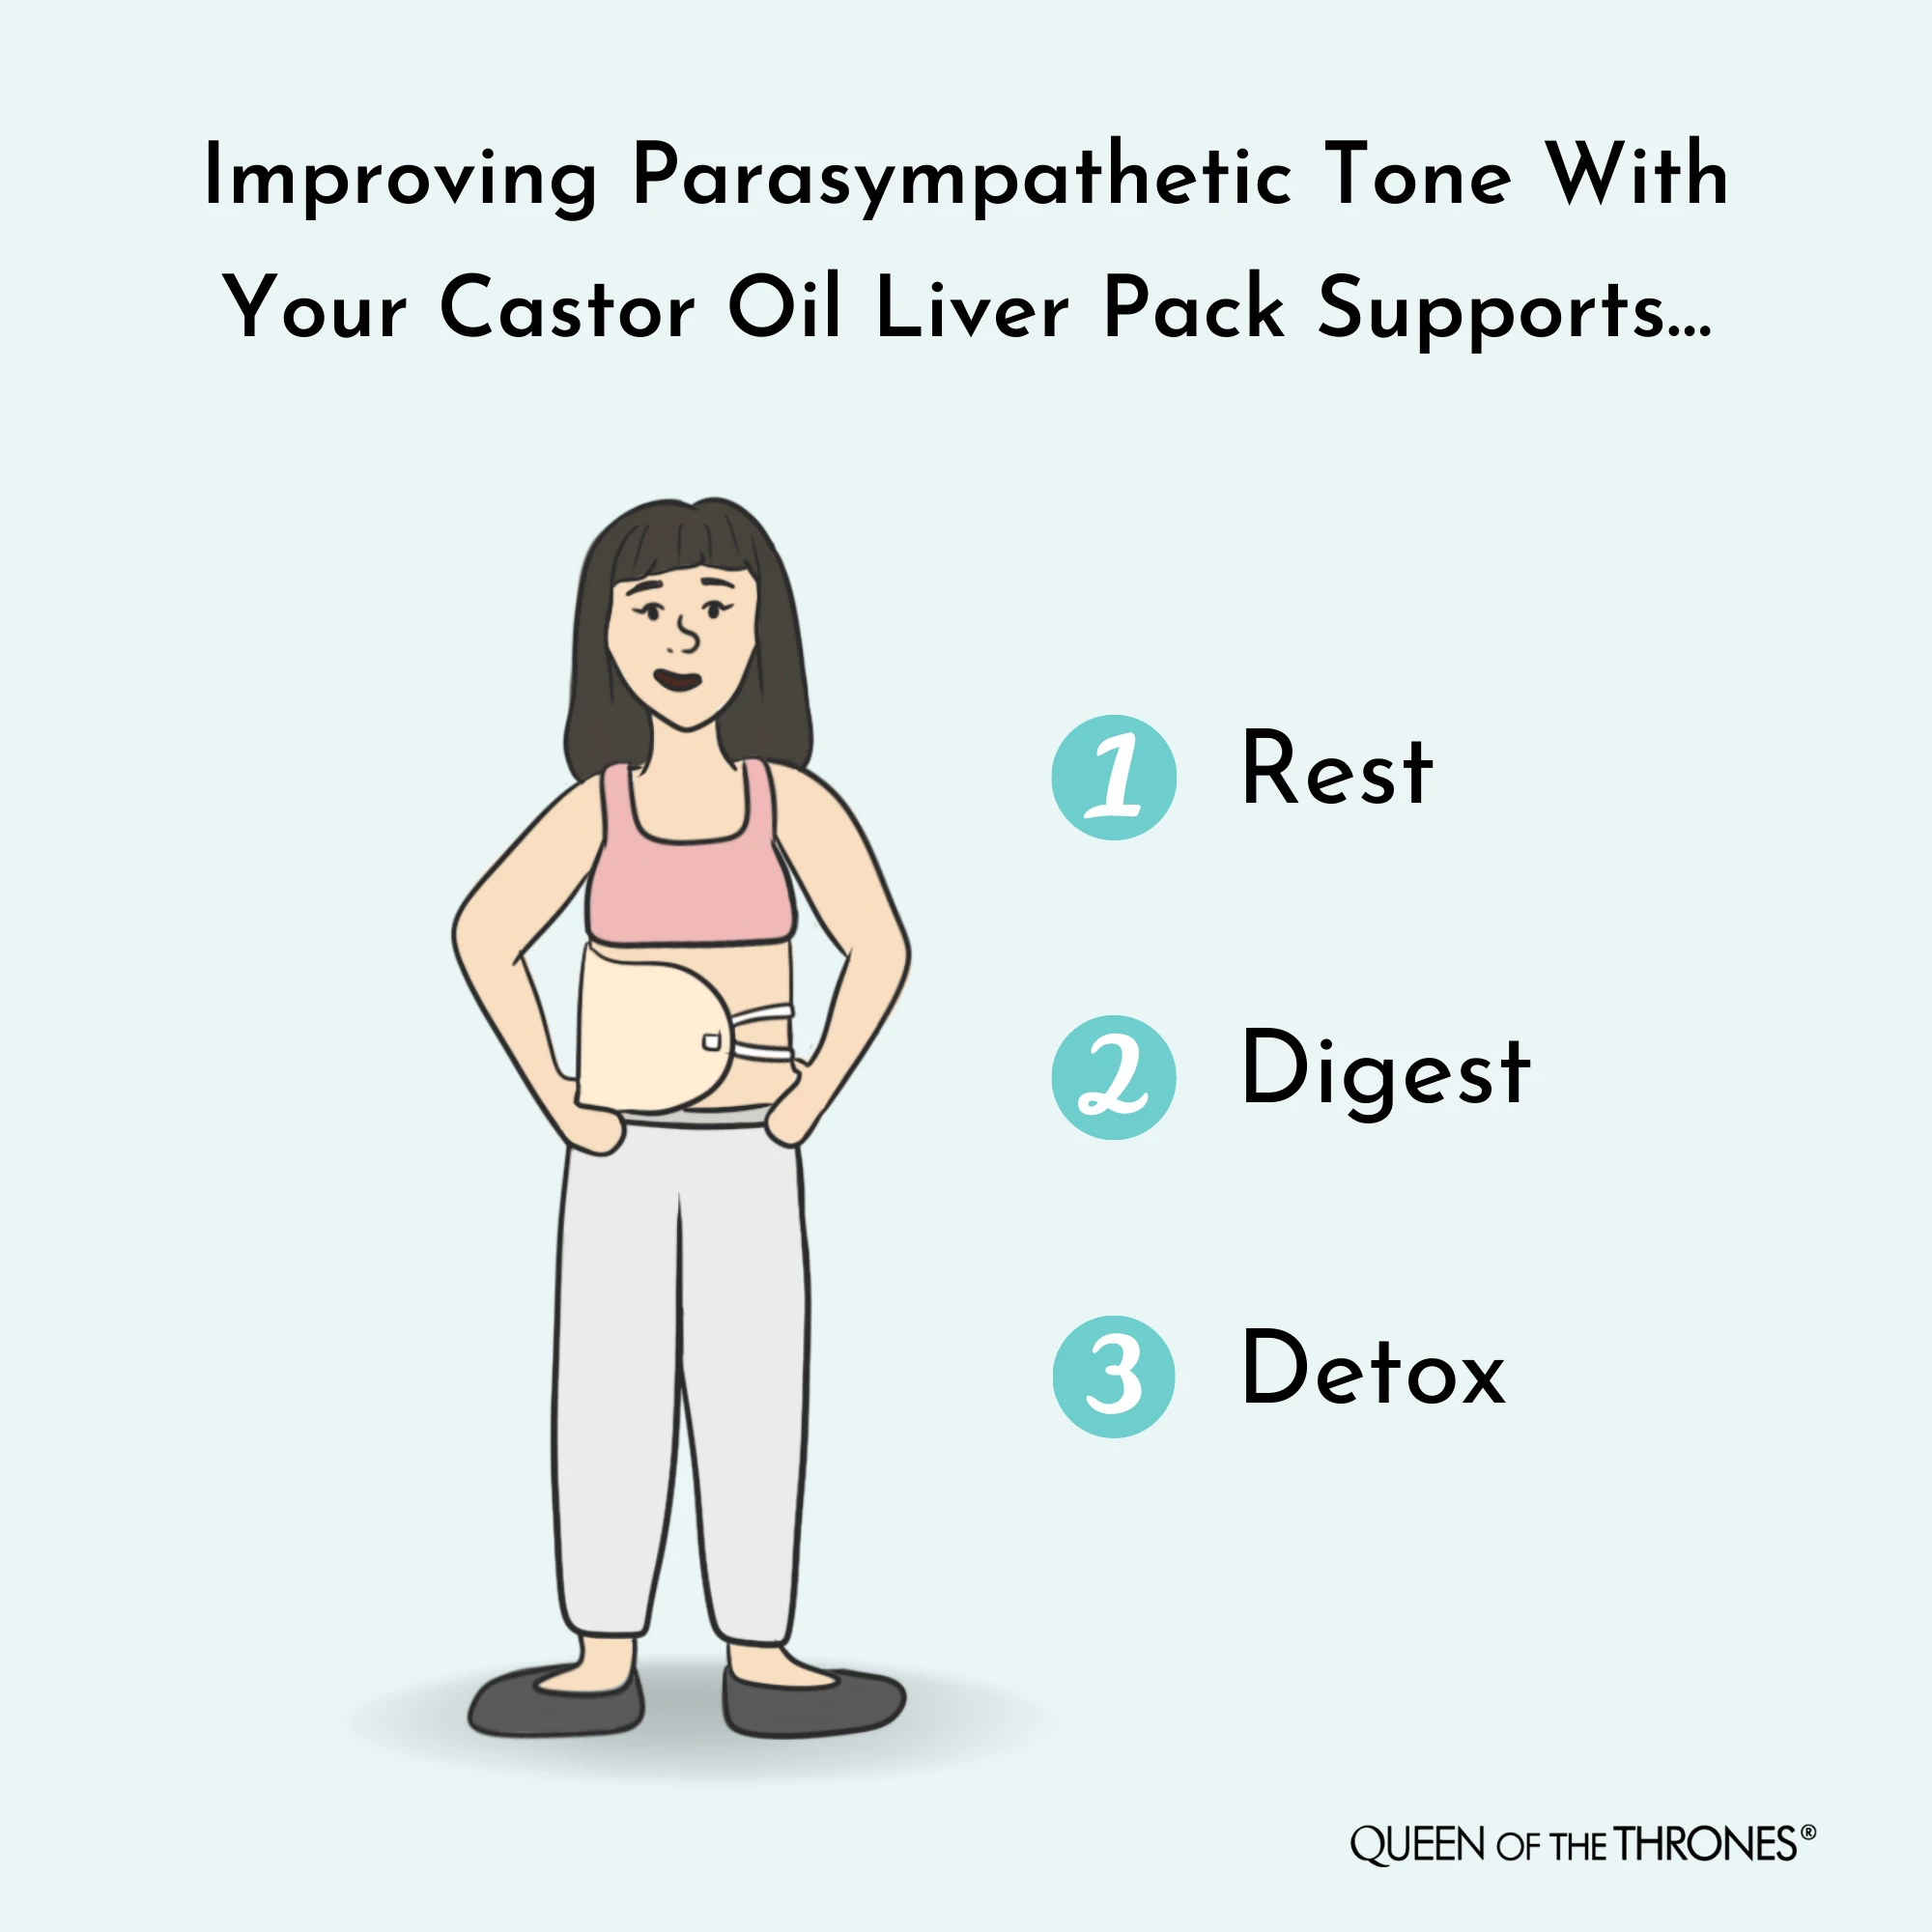 Queen of the Thrones Castor Oil Packs help you to rest digest and detox